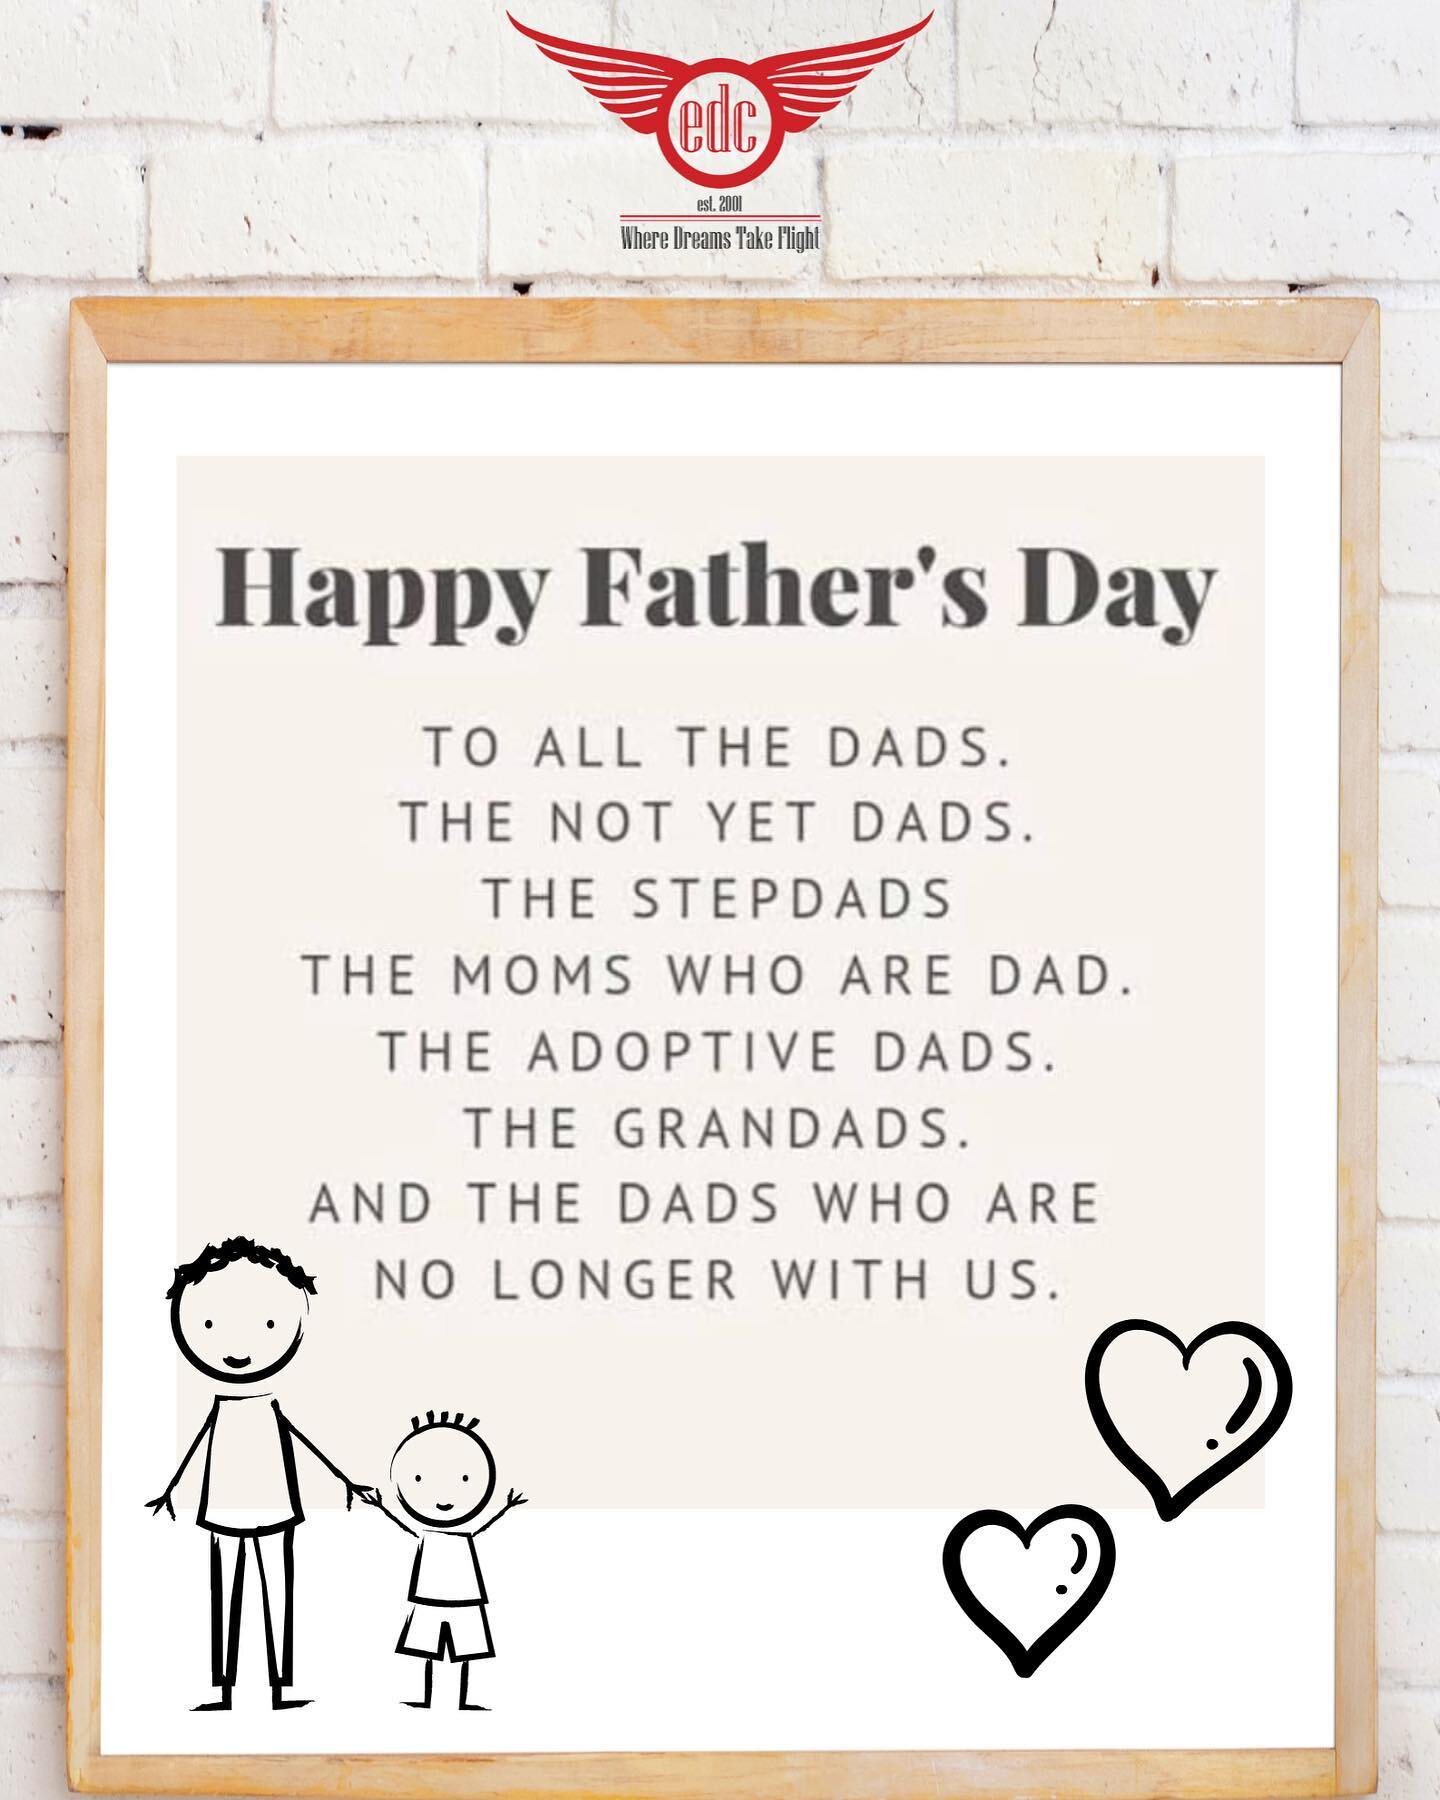 Happy Father&rsquo;s Day to all our EDC Families. Thank you for all you do ❤️🖤🤍 

#edc #edgedancecentre #fathersday #theedge #edcdads #rydedanceschool